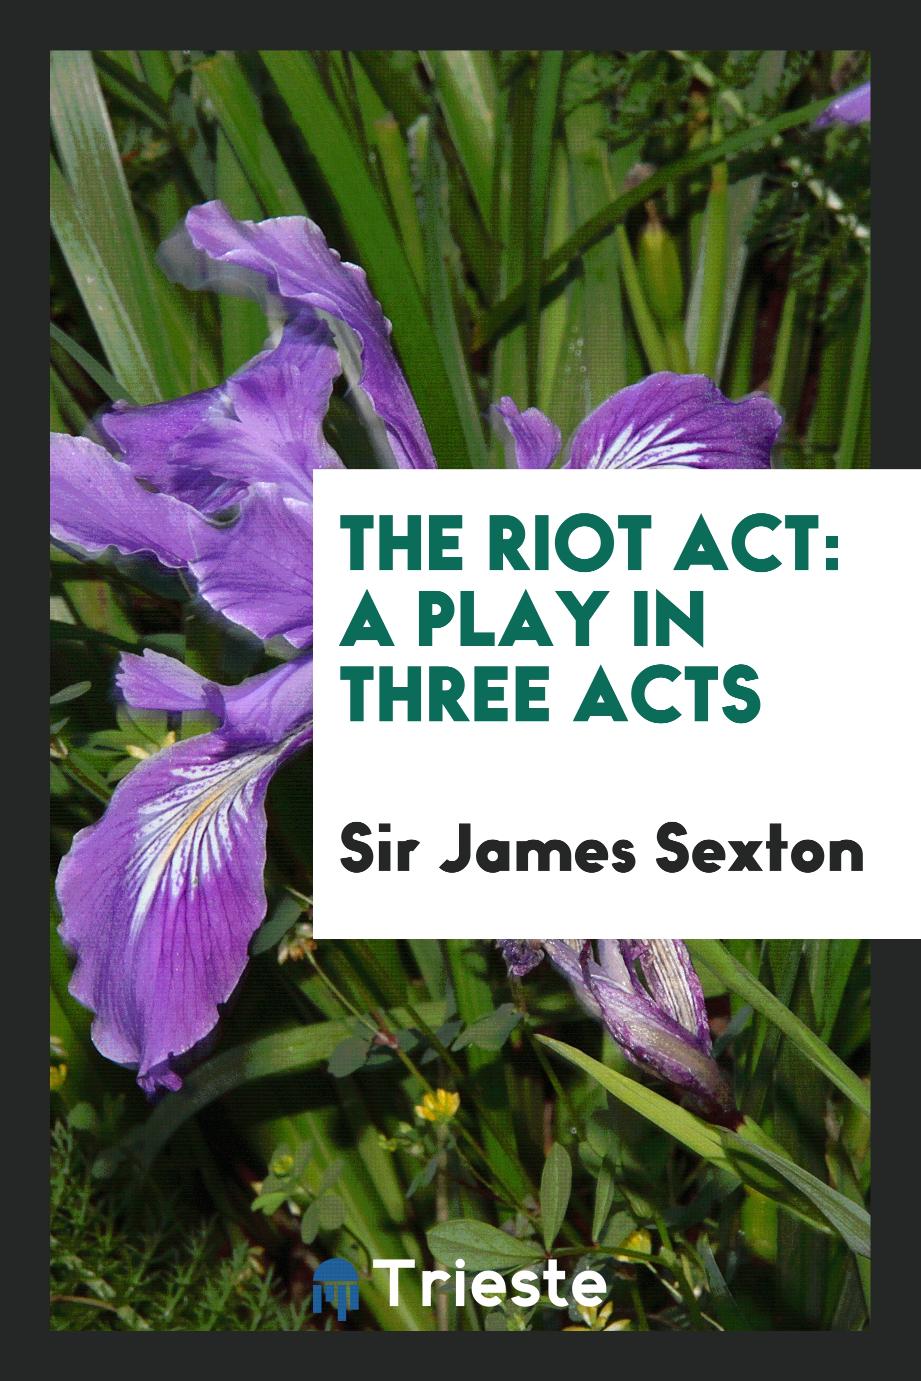 The riot act: a play in three acts